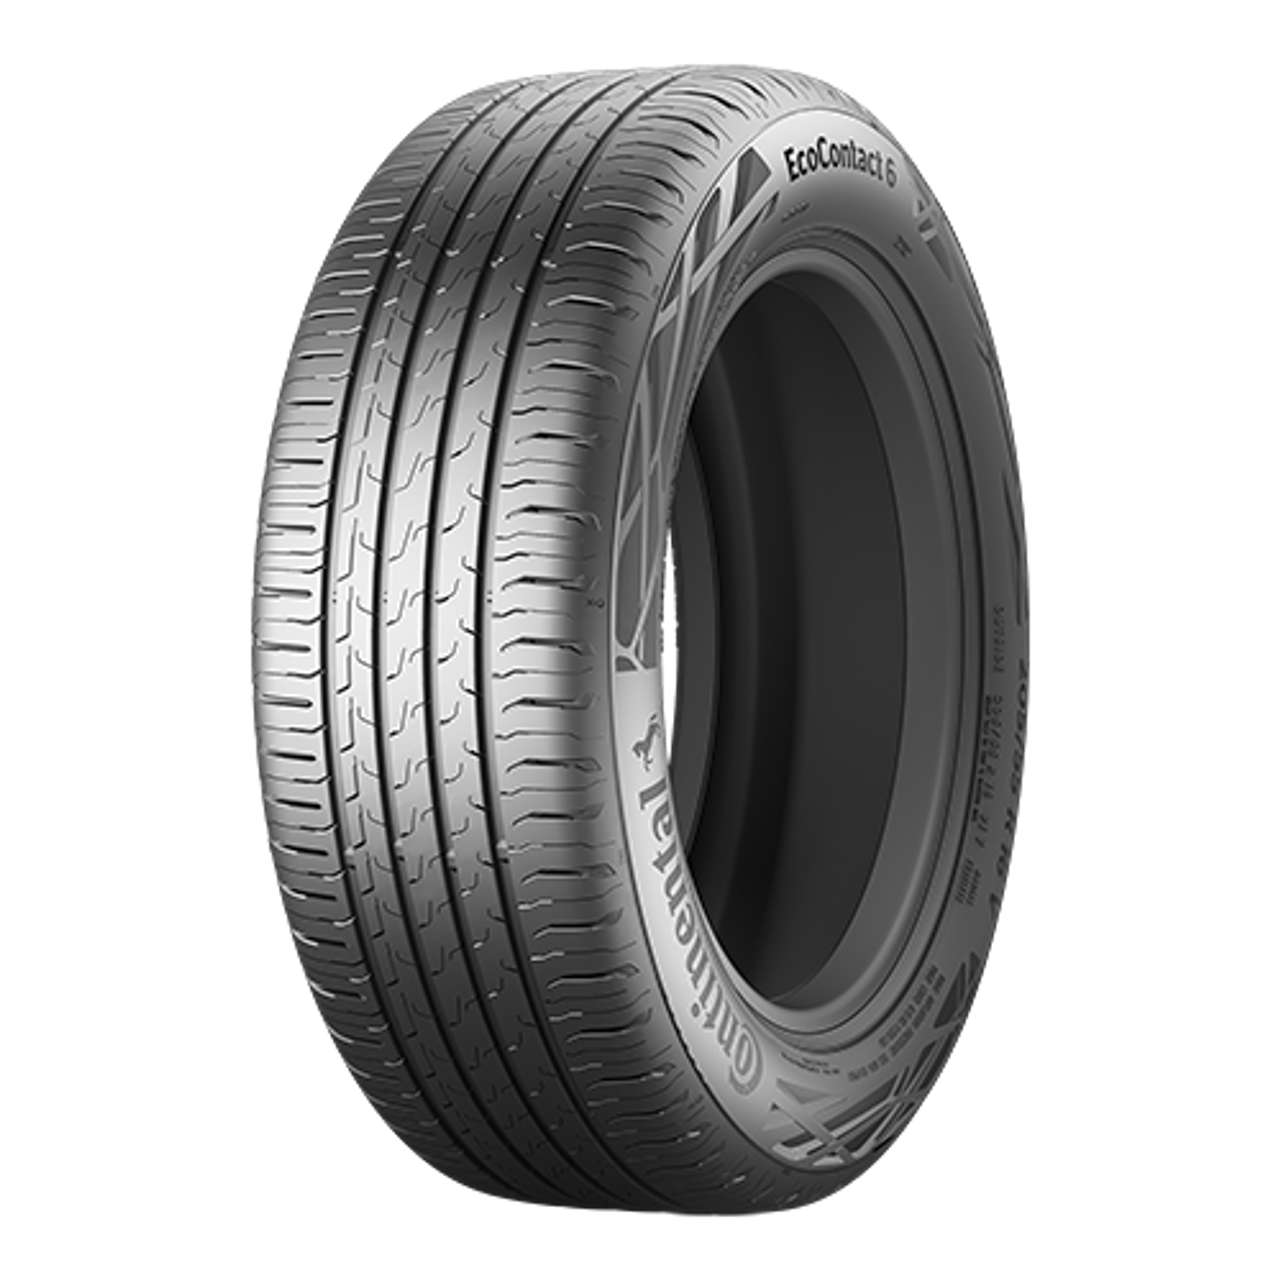 CONTINENTAL ECOCONTACT 6 (EVc) 175/65R14 82H 